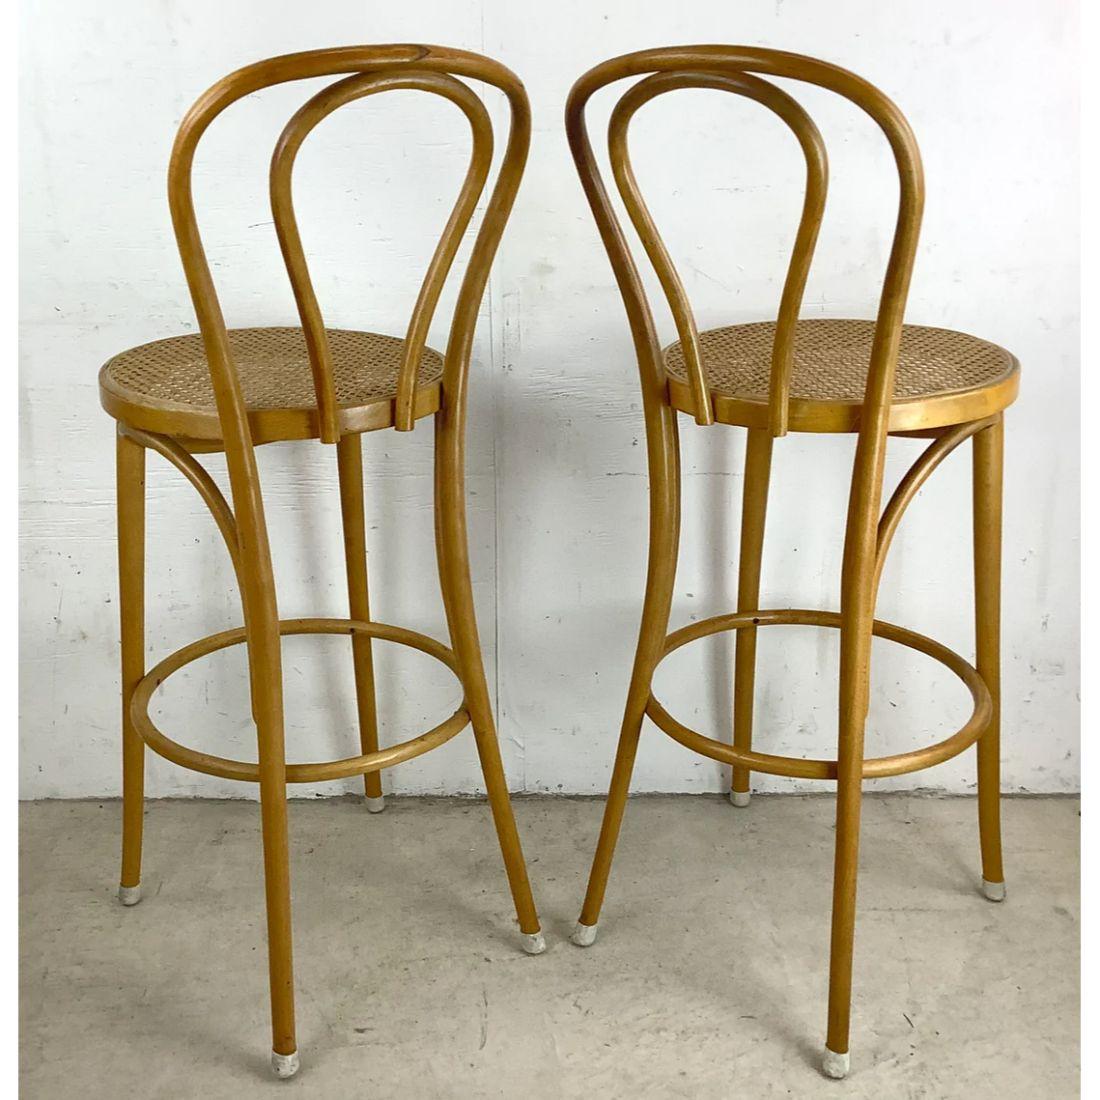 Other Pair of Vintage Modern Cane Seat Barstools For Sale